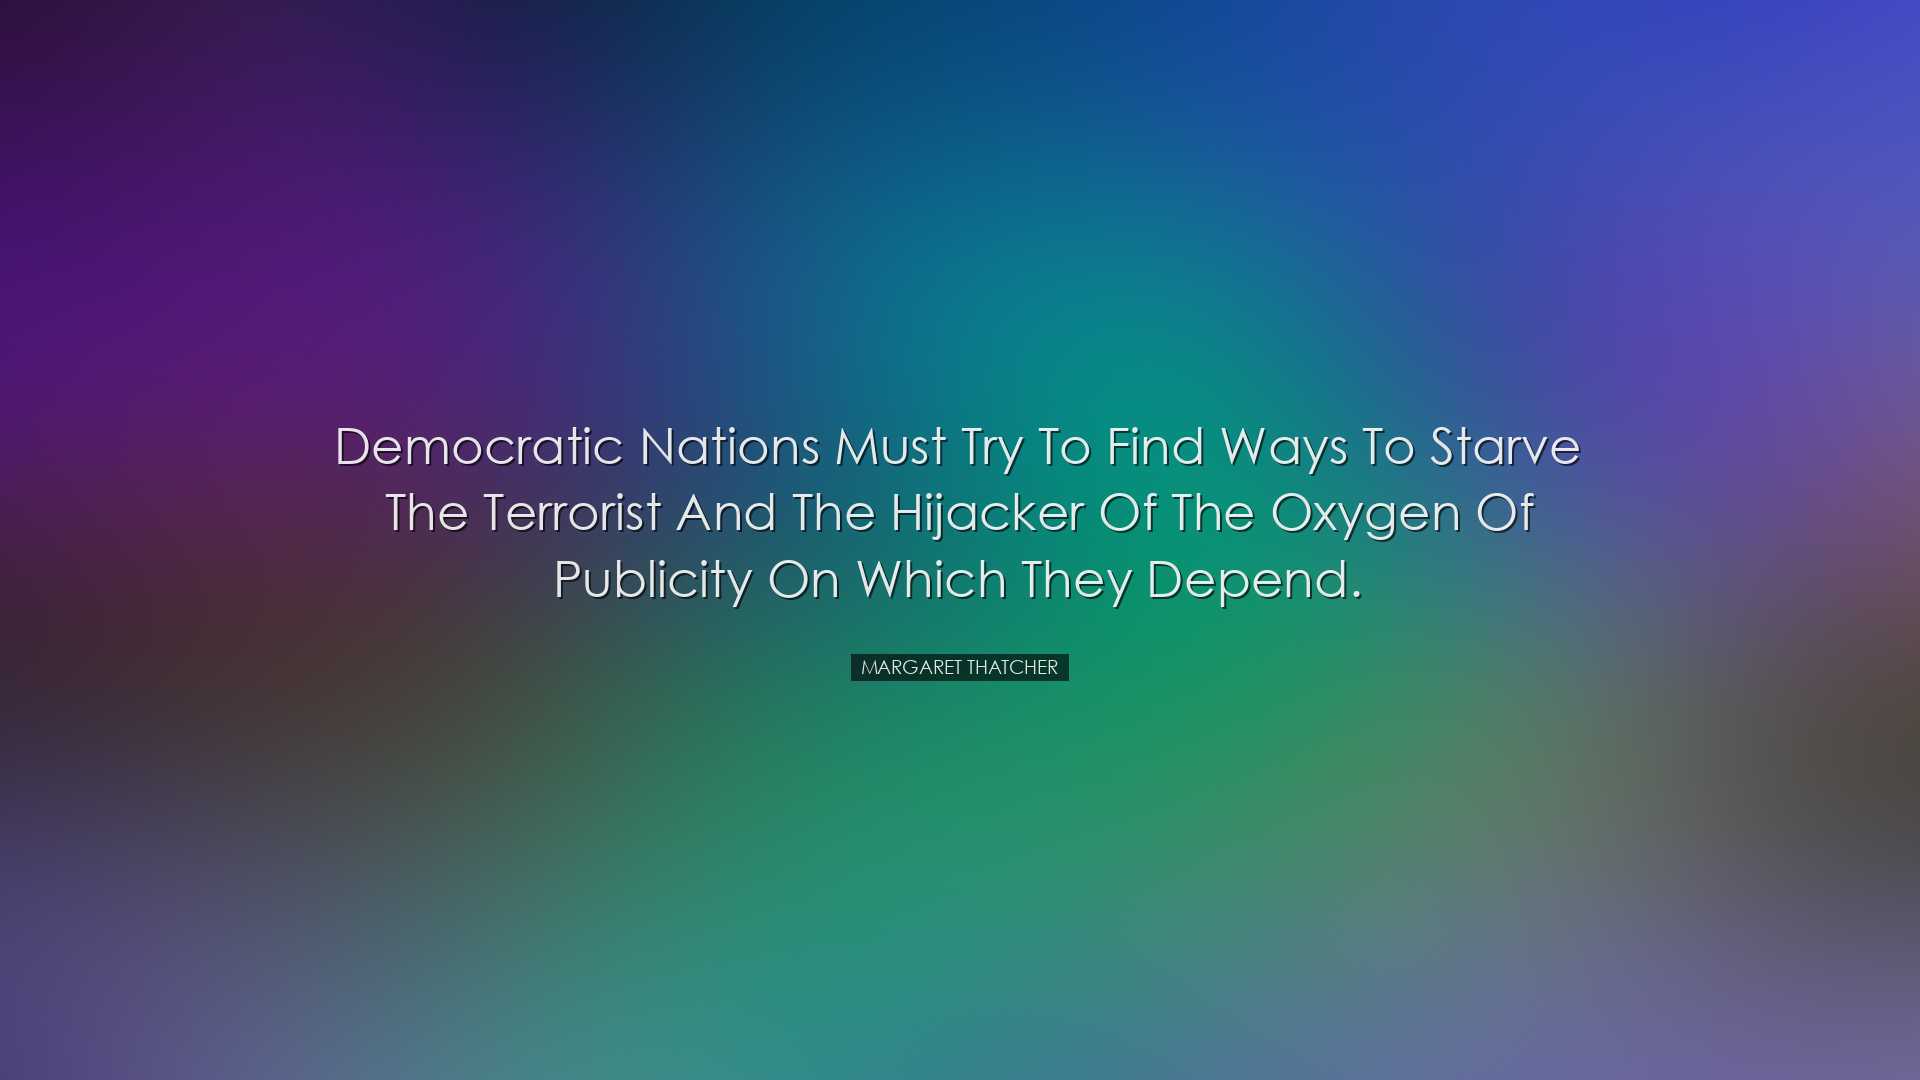 Democratic nations must try to find ways to starve the terrorist a